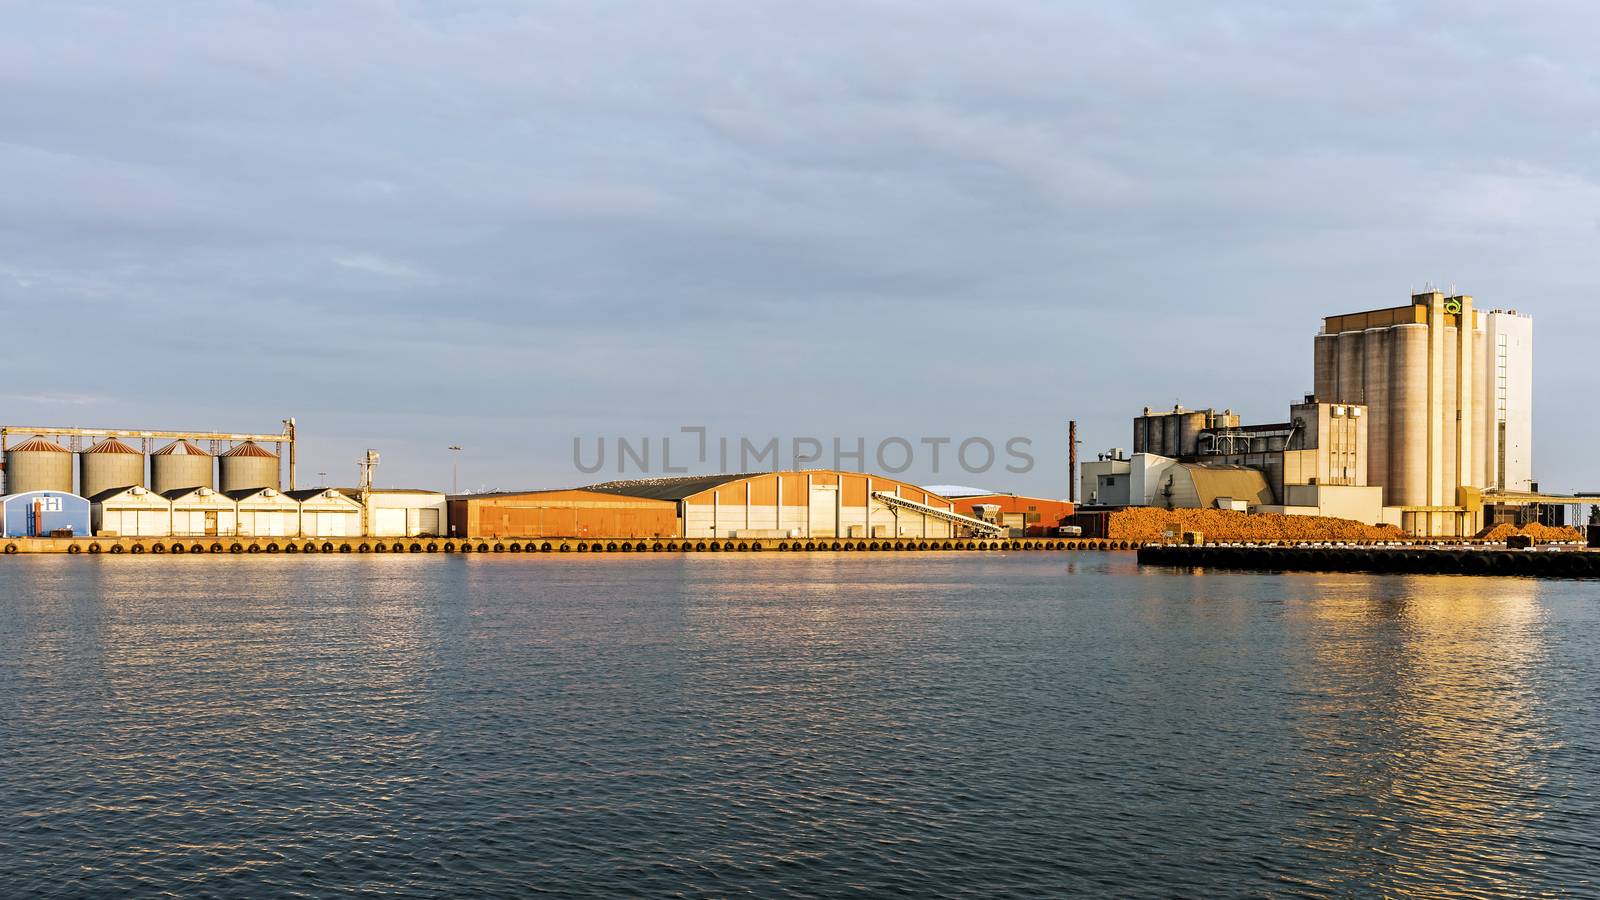 Bulk terminal in the Port of Kalmar. The port owned by the municipality of Kalmar handles 1 million tons of goods per year mainly petroleum, forestry and agricultural.